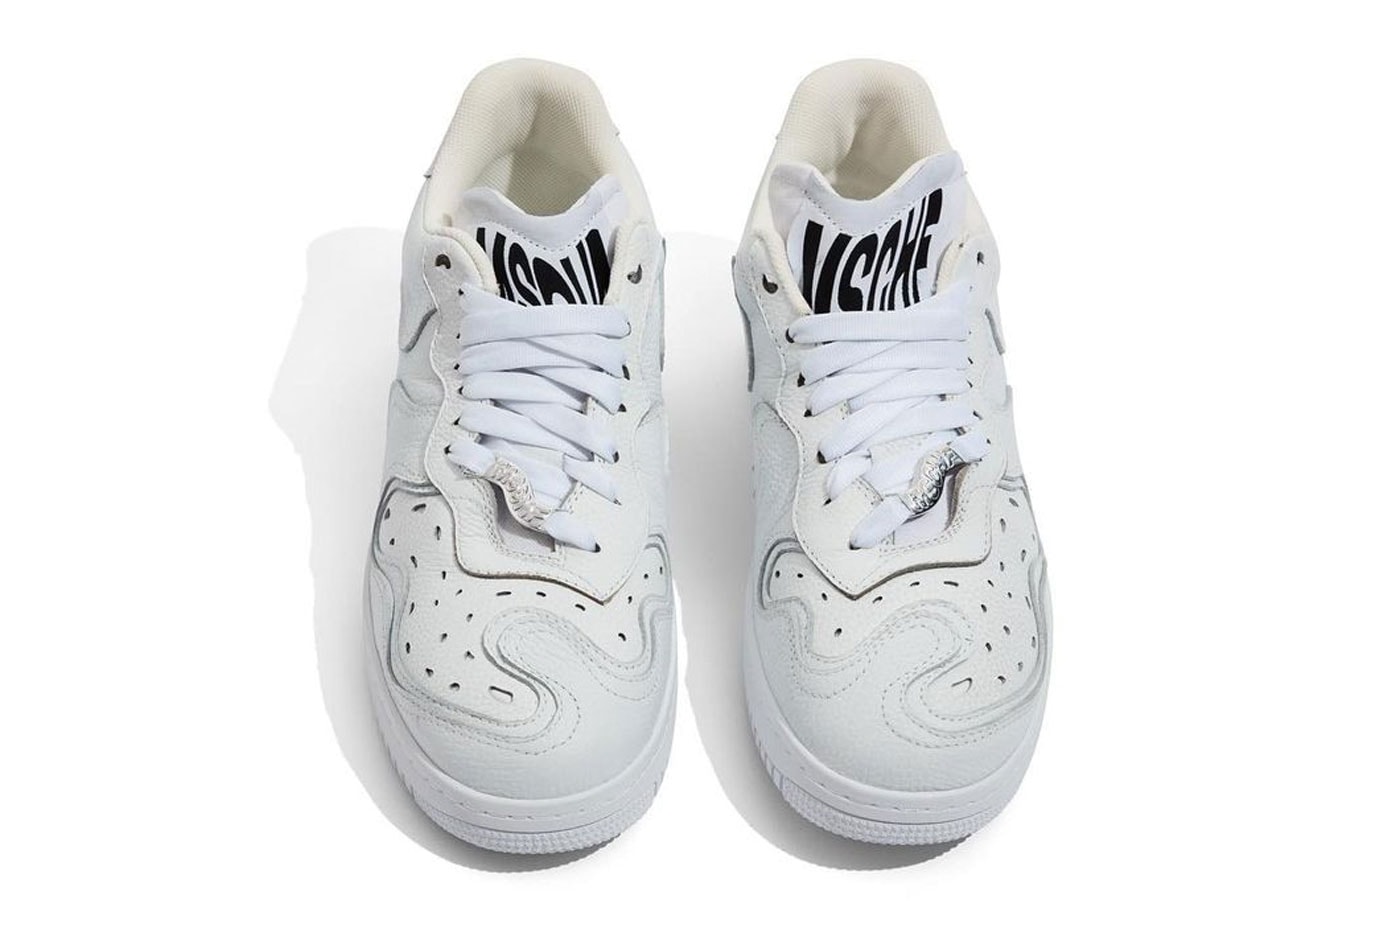 MSCHF AF1 Air Force 1 Super Normal Sneakers nike air force 1 wavy baby release info news date price